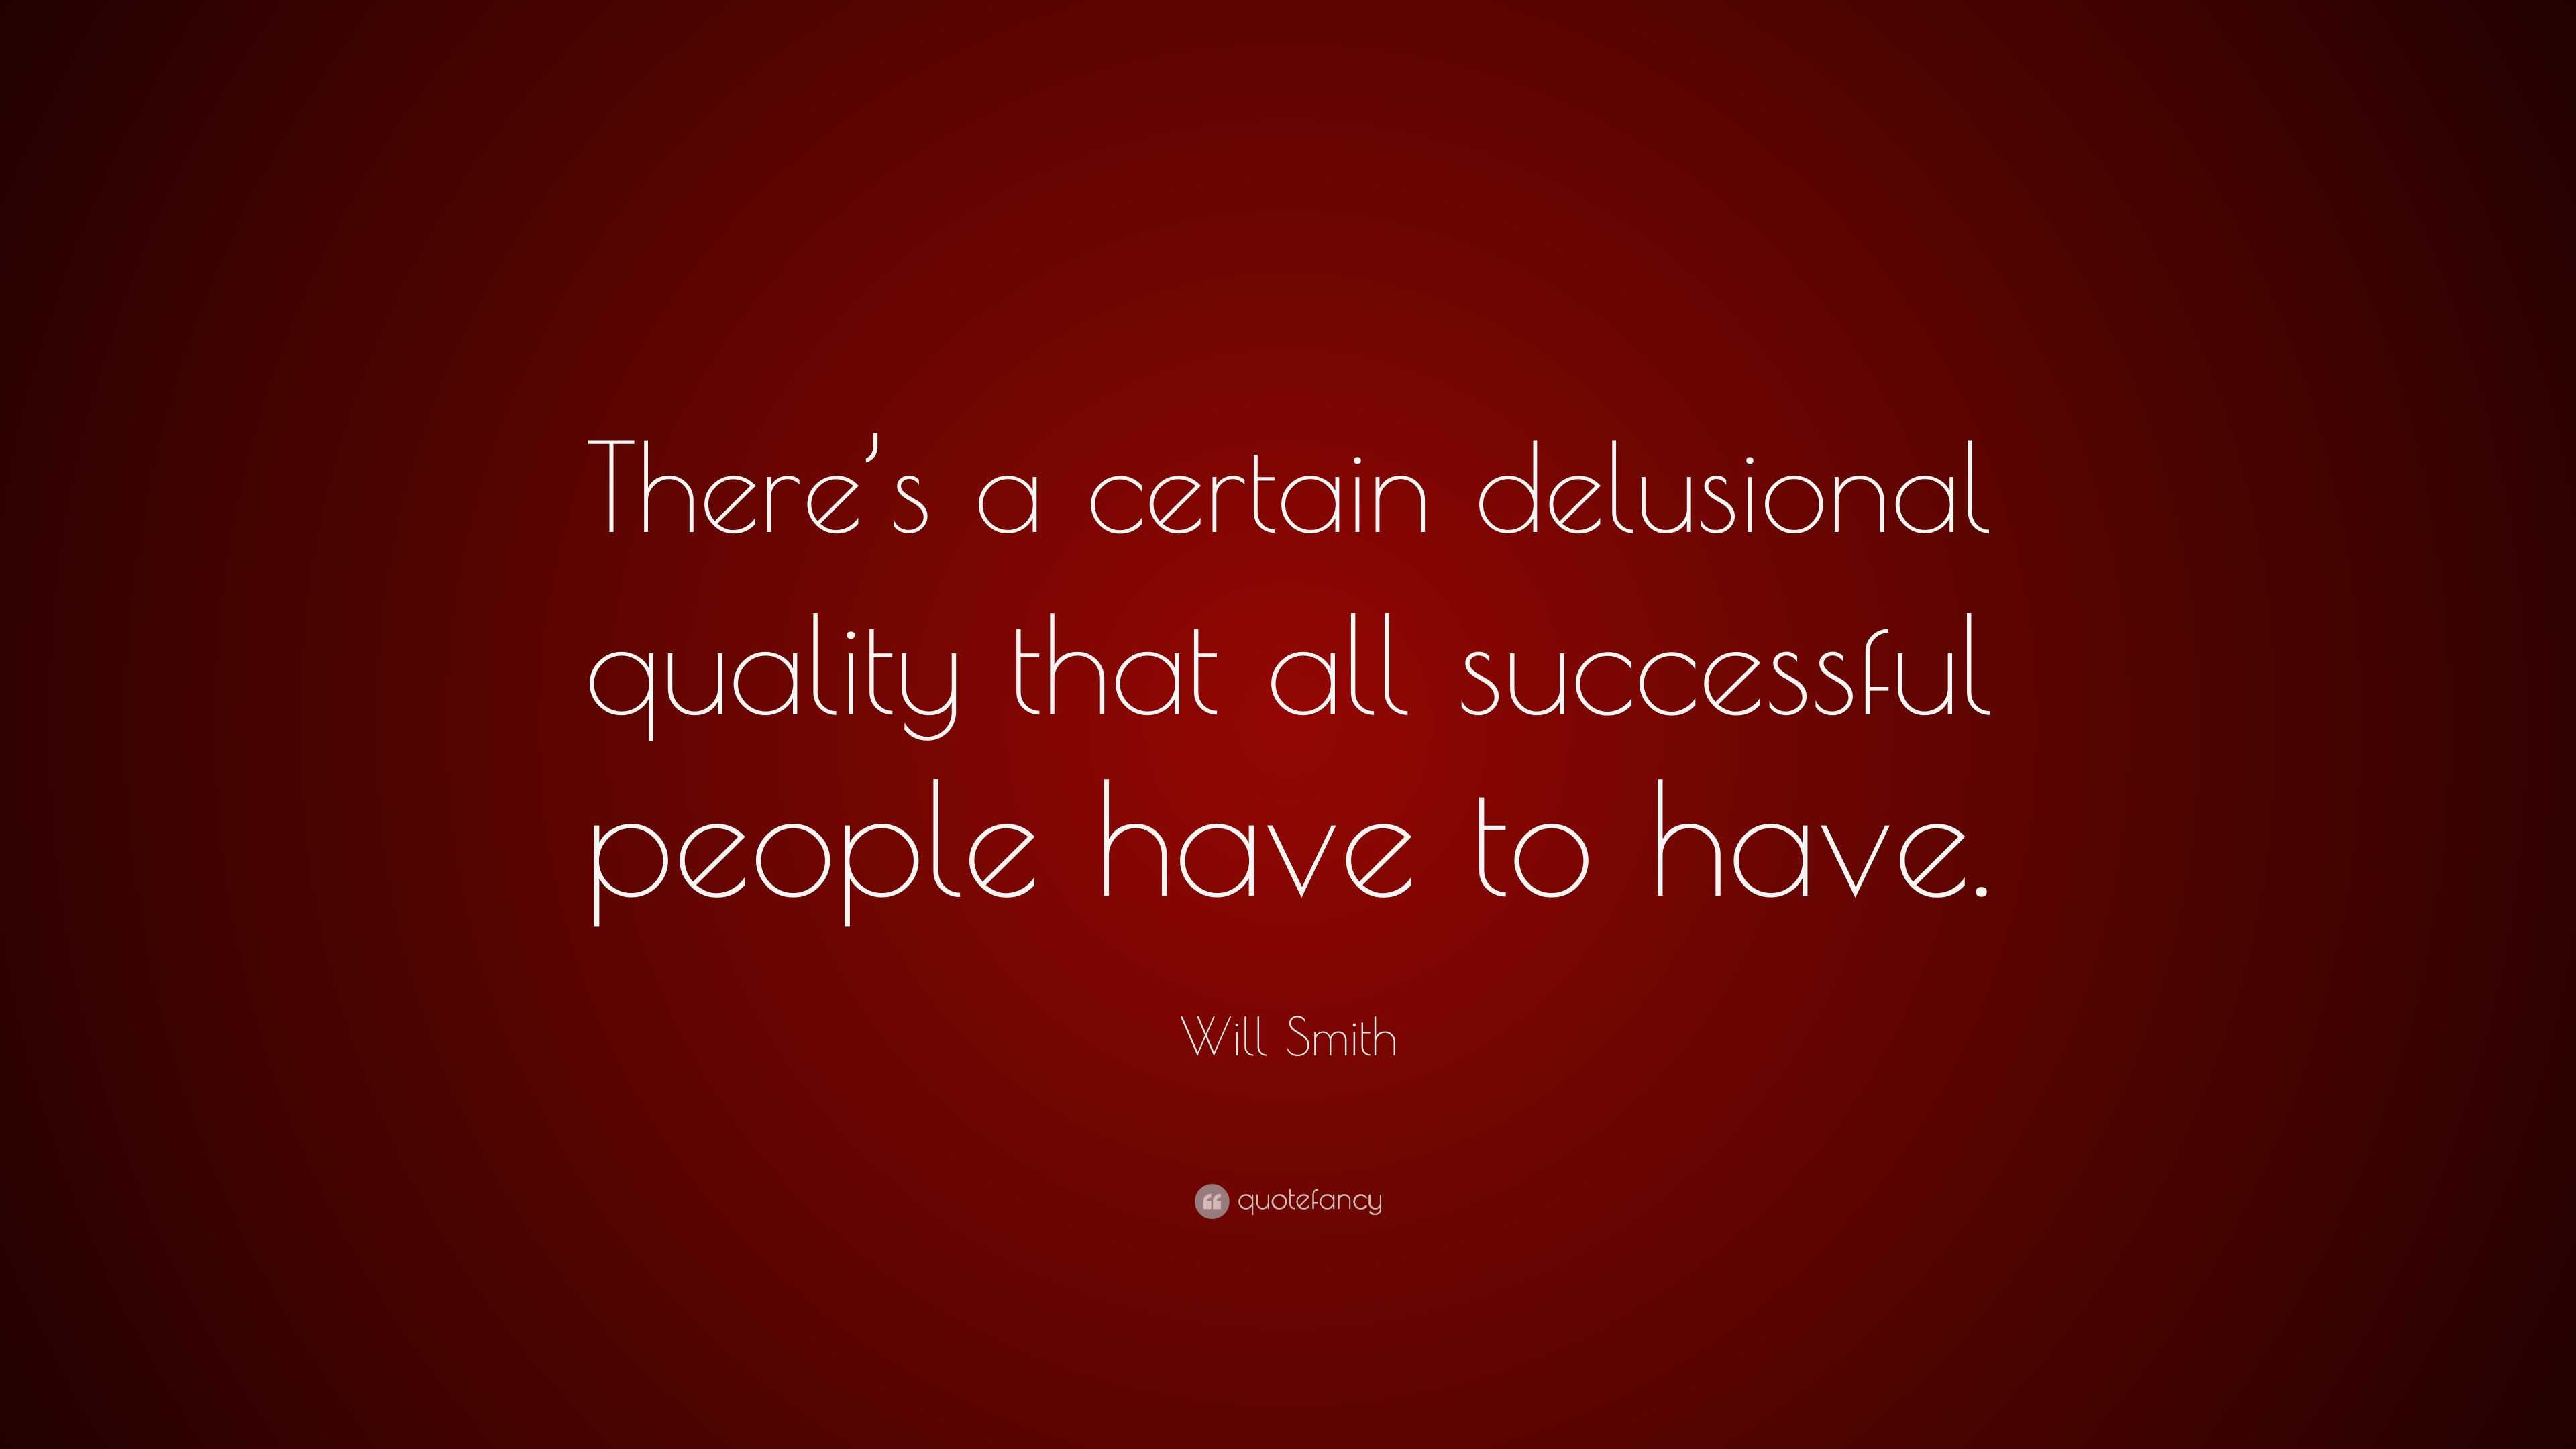 Will Smith Quote: “There’s a certain delusional quality that all ...